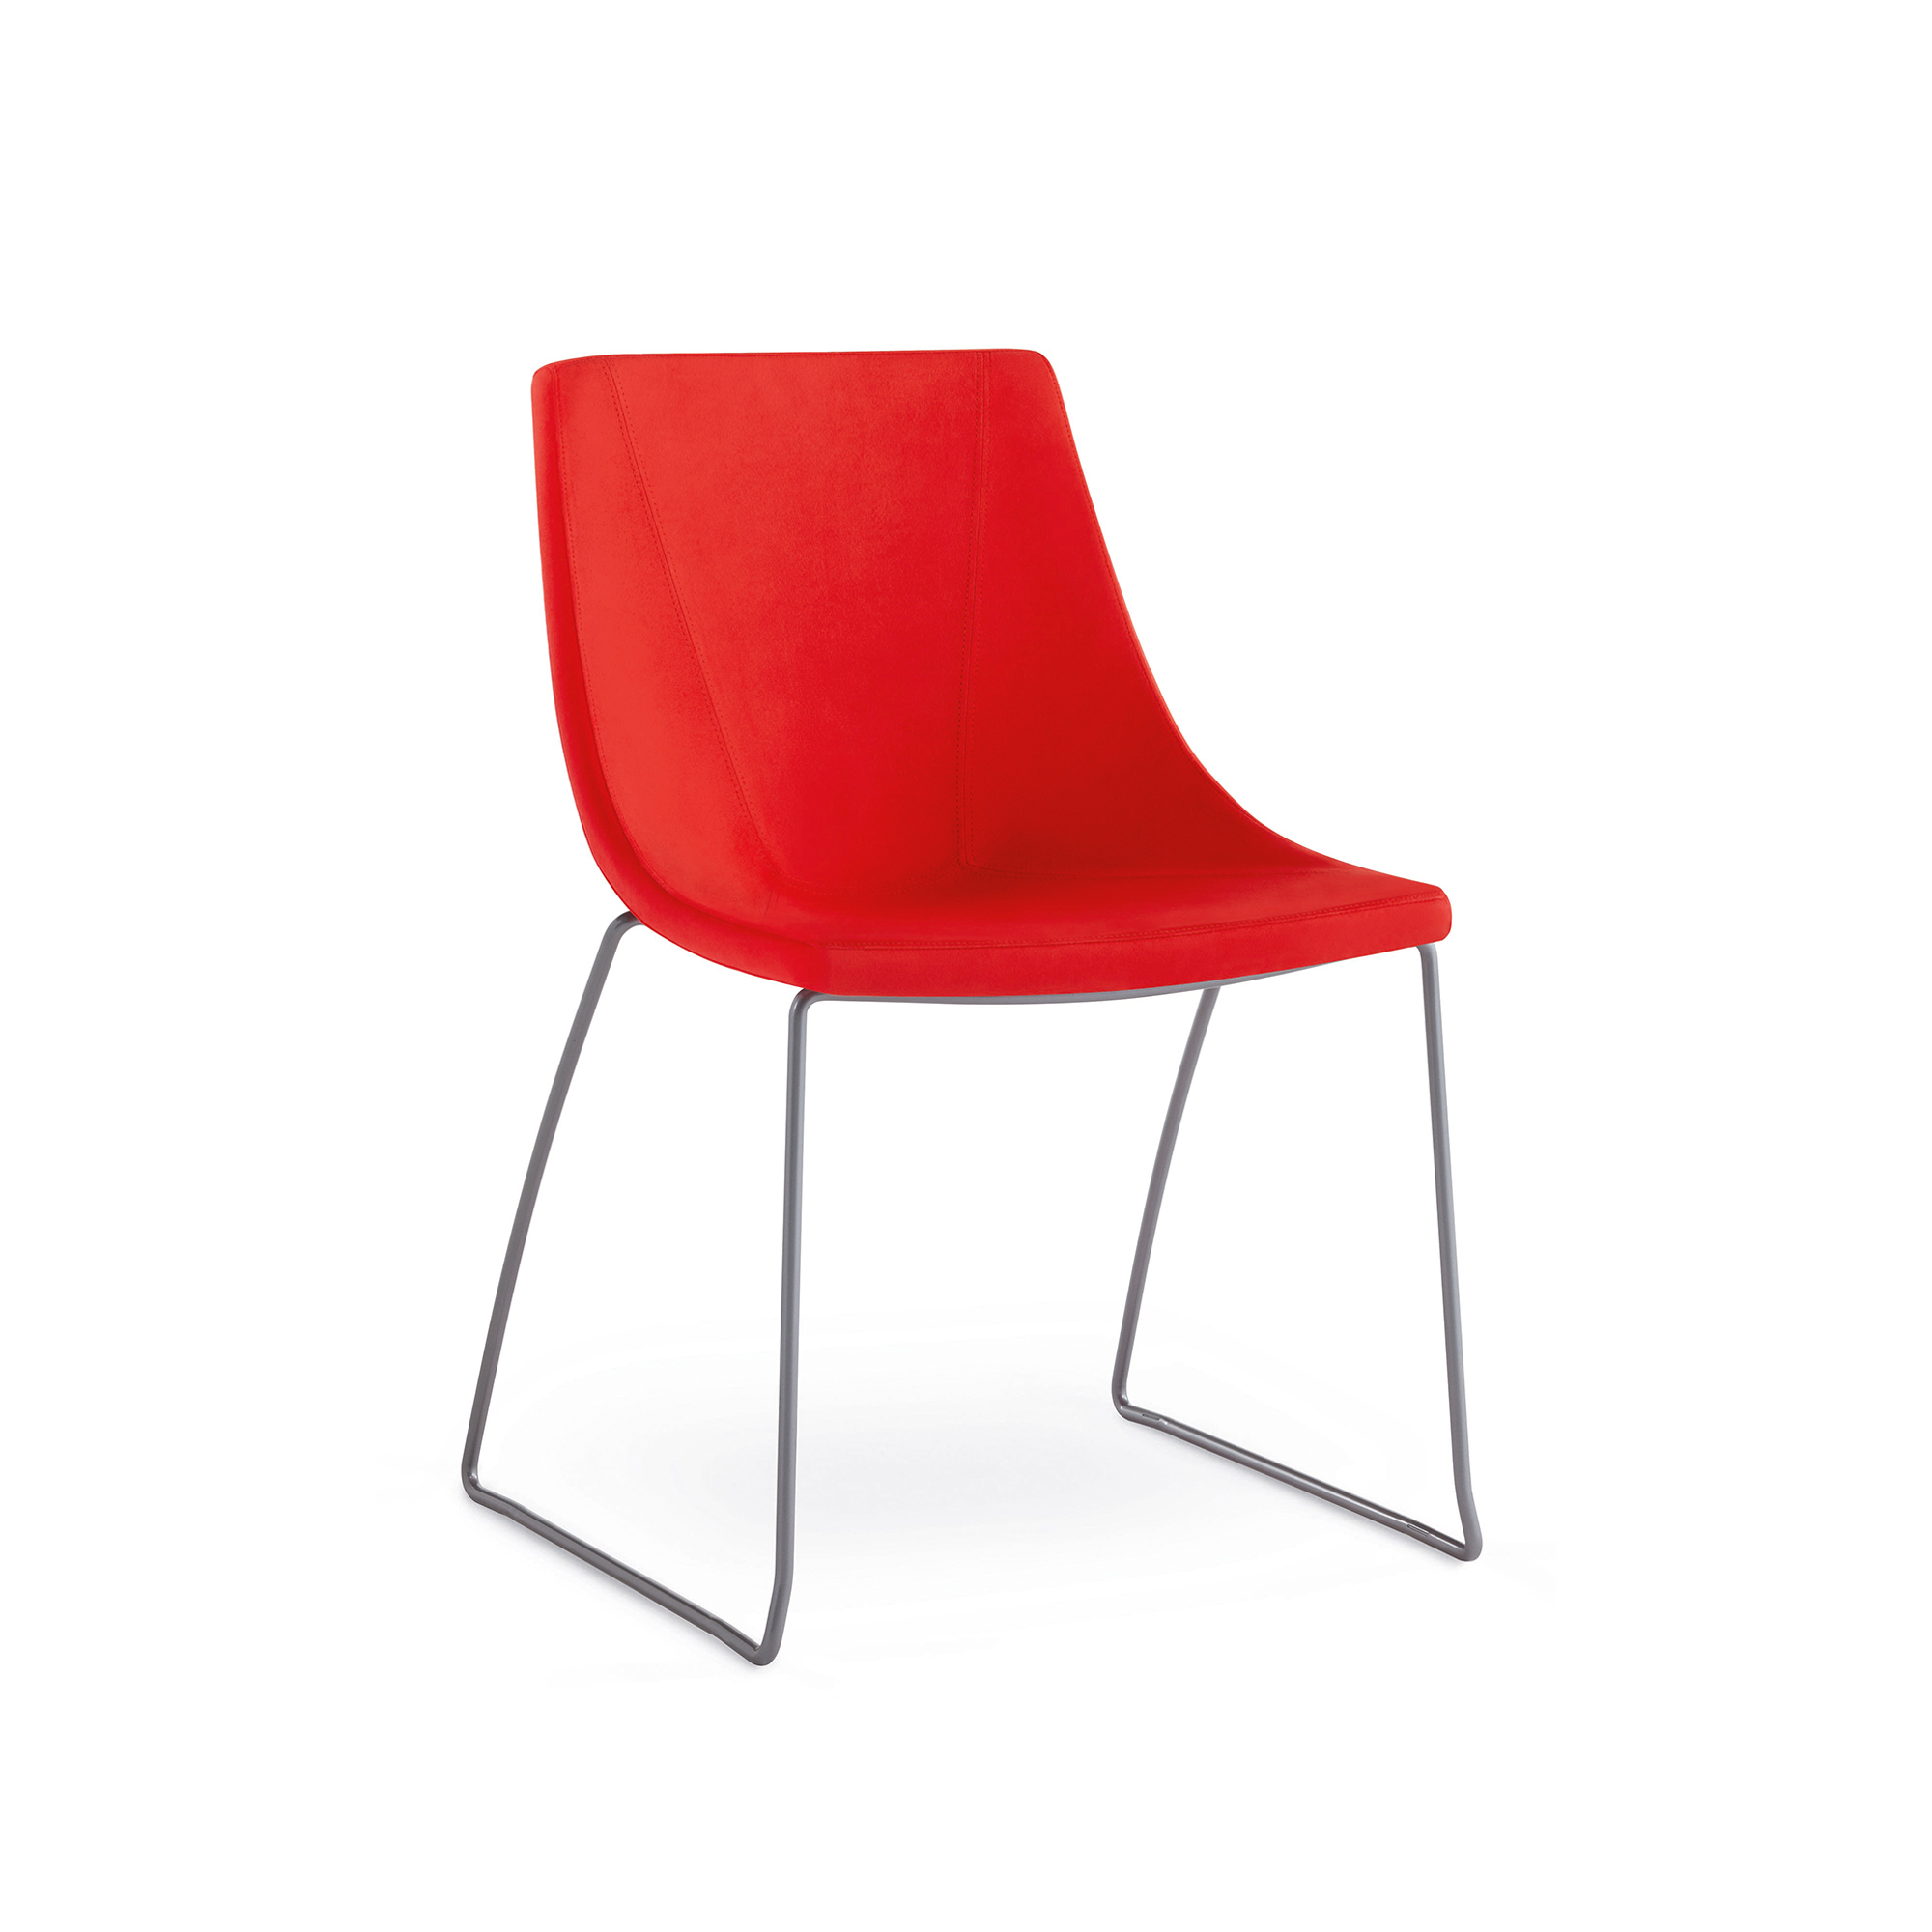 Chirp Guest Chair, Sled Base, Red Upholstery